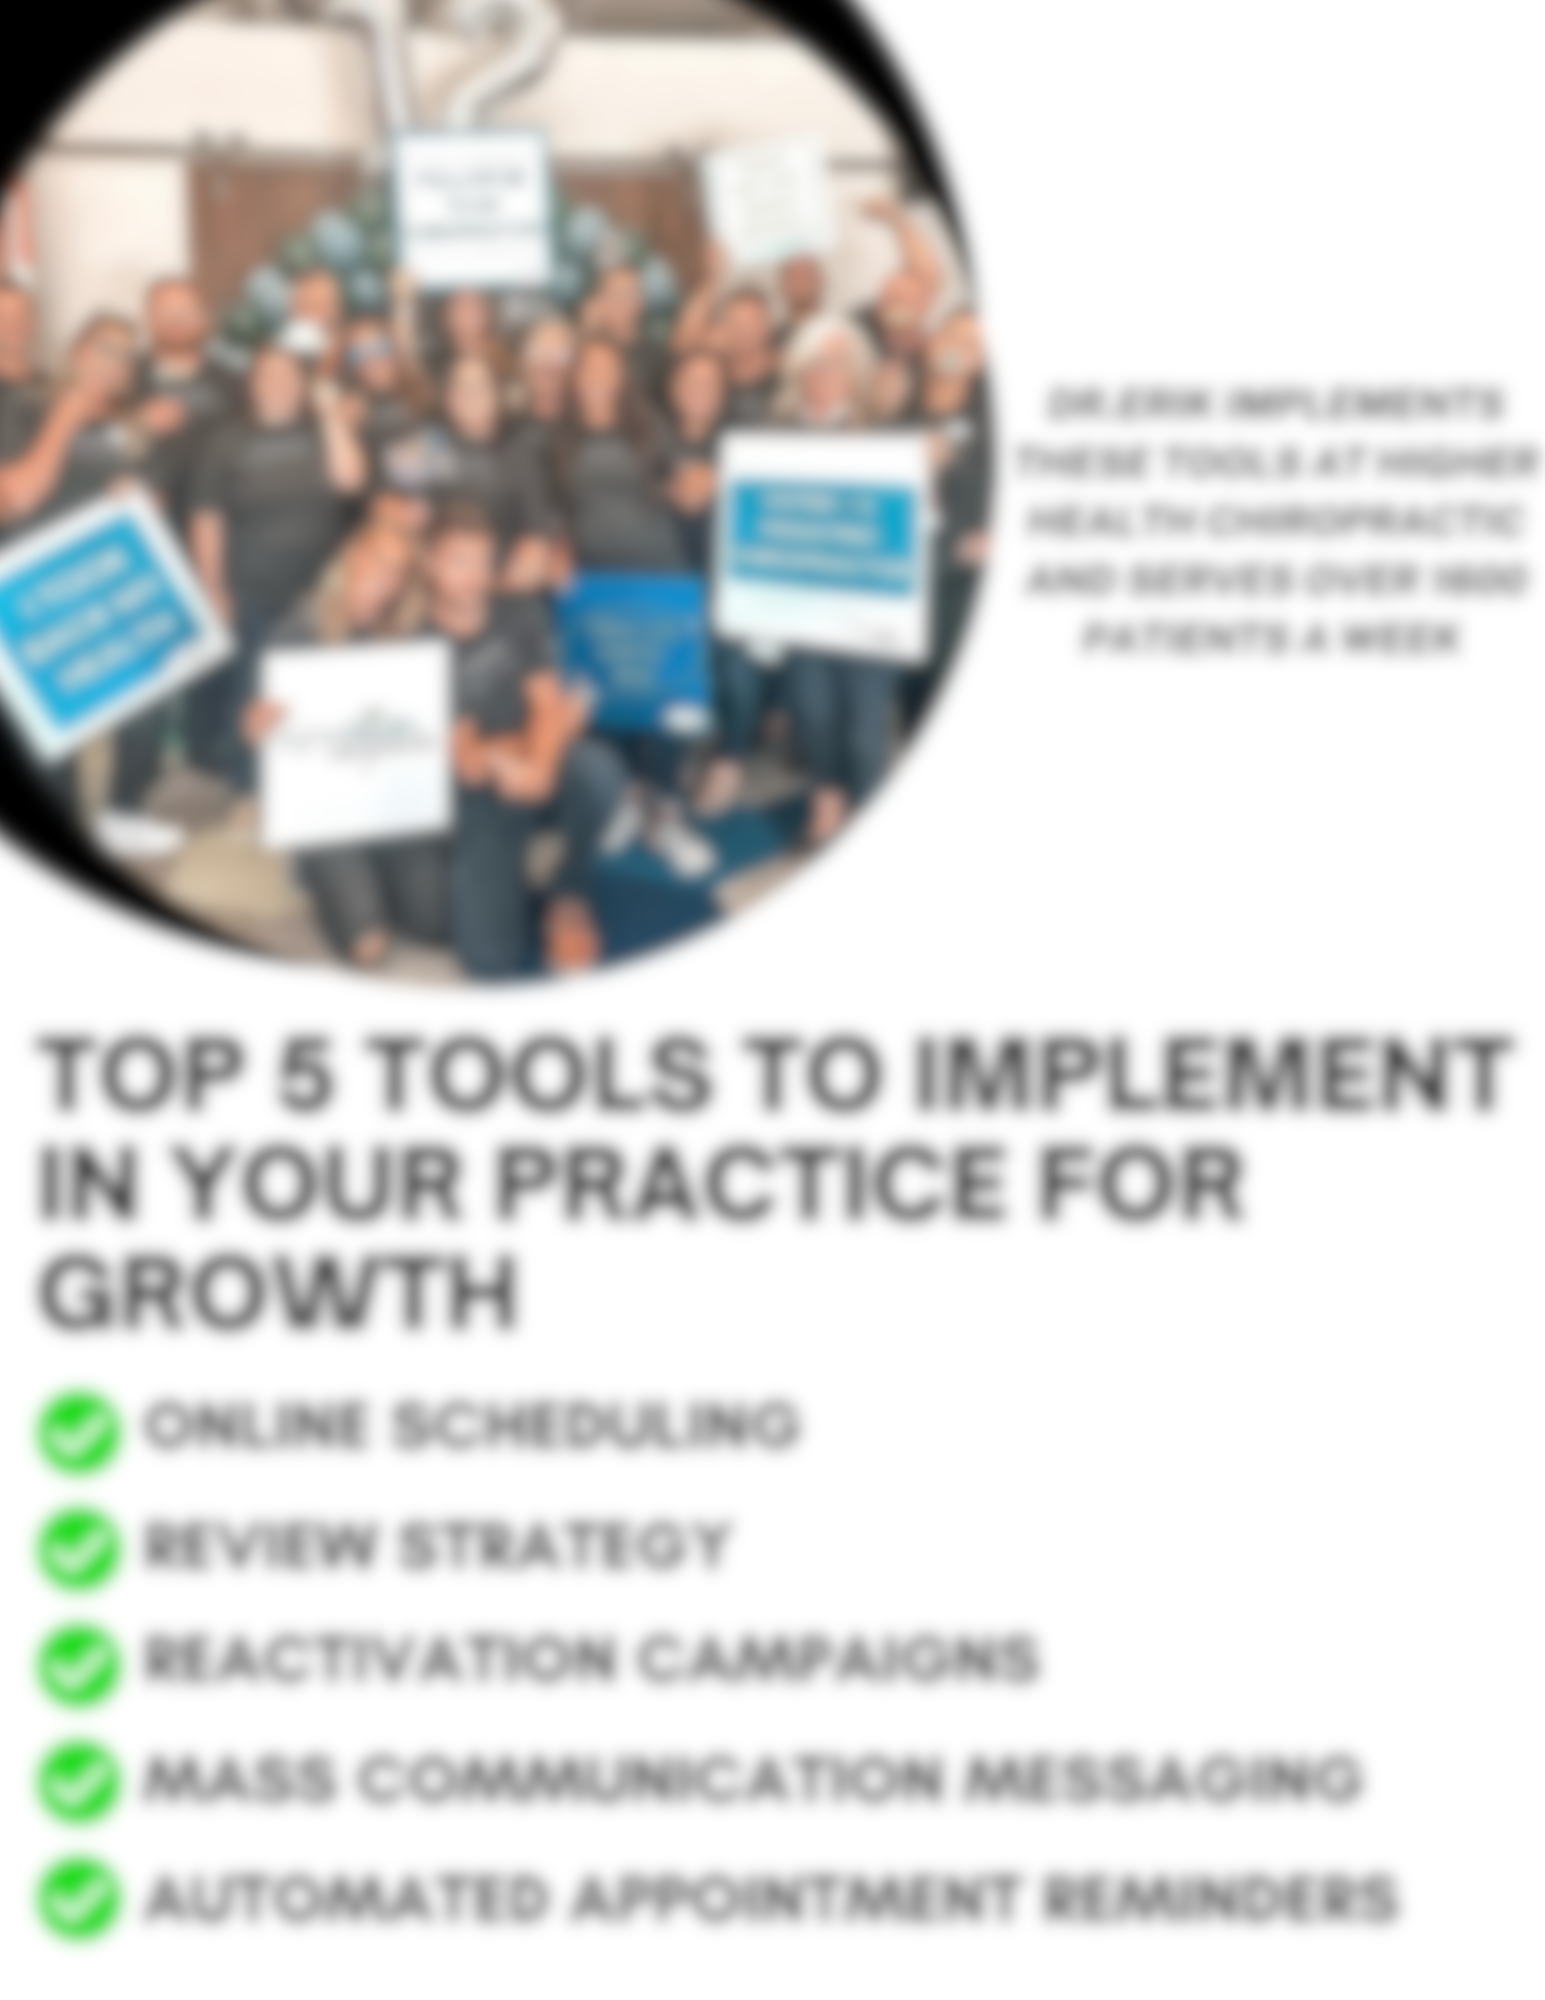 MILLENNIAL TOP TOOLS TO IMPLEMENT IN YOUR PRACTICE (2)-1